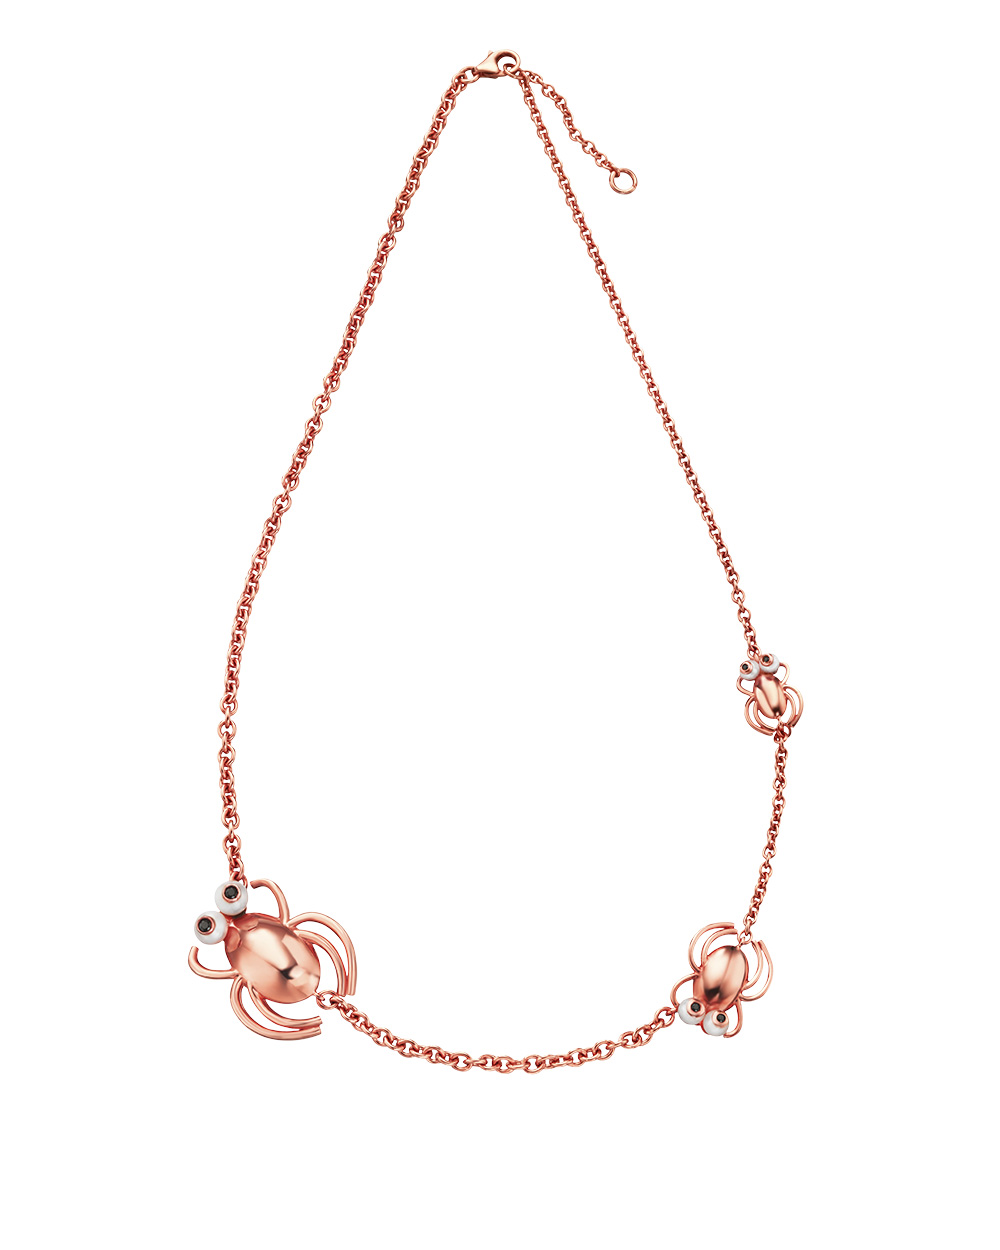 Necklace, $540, by Tous.